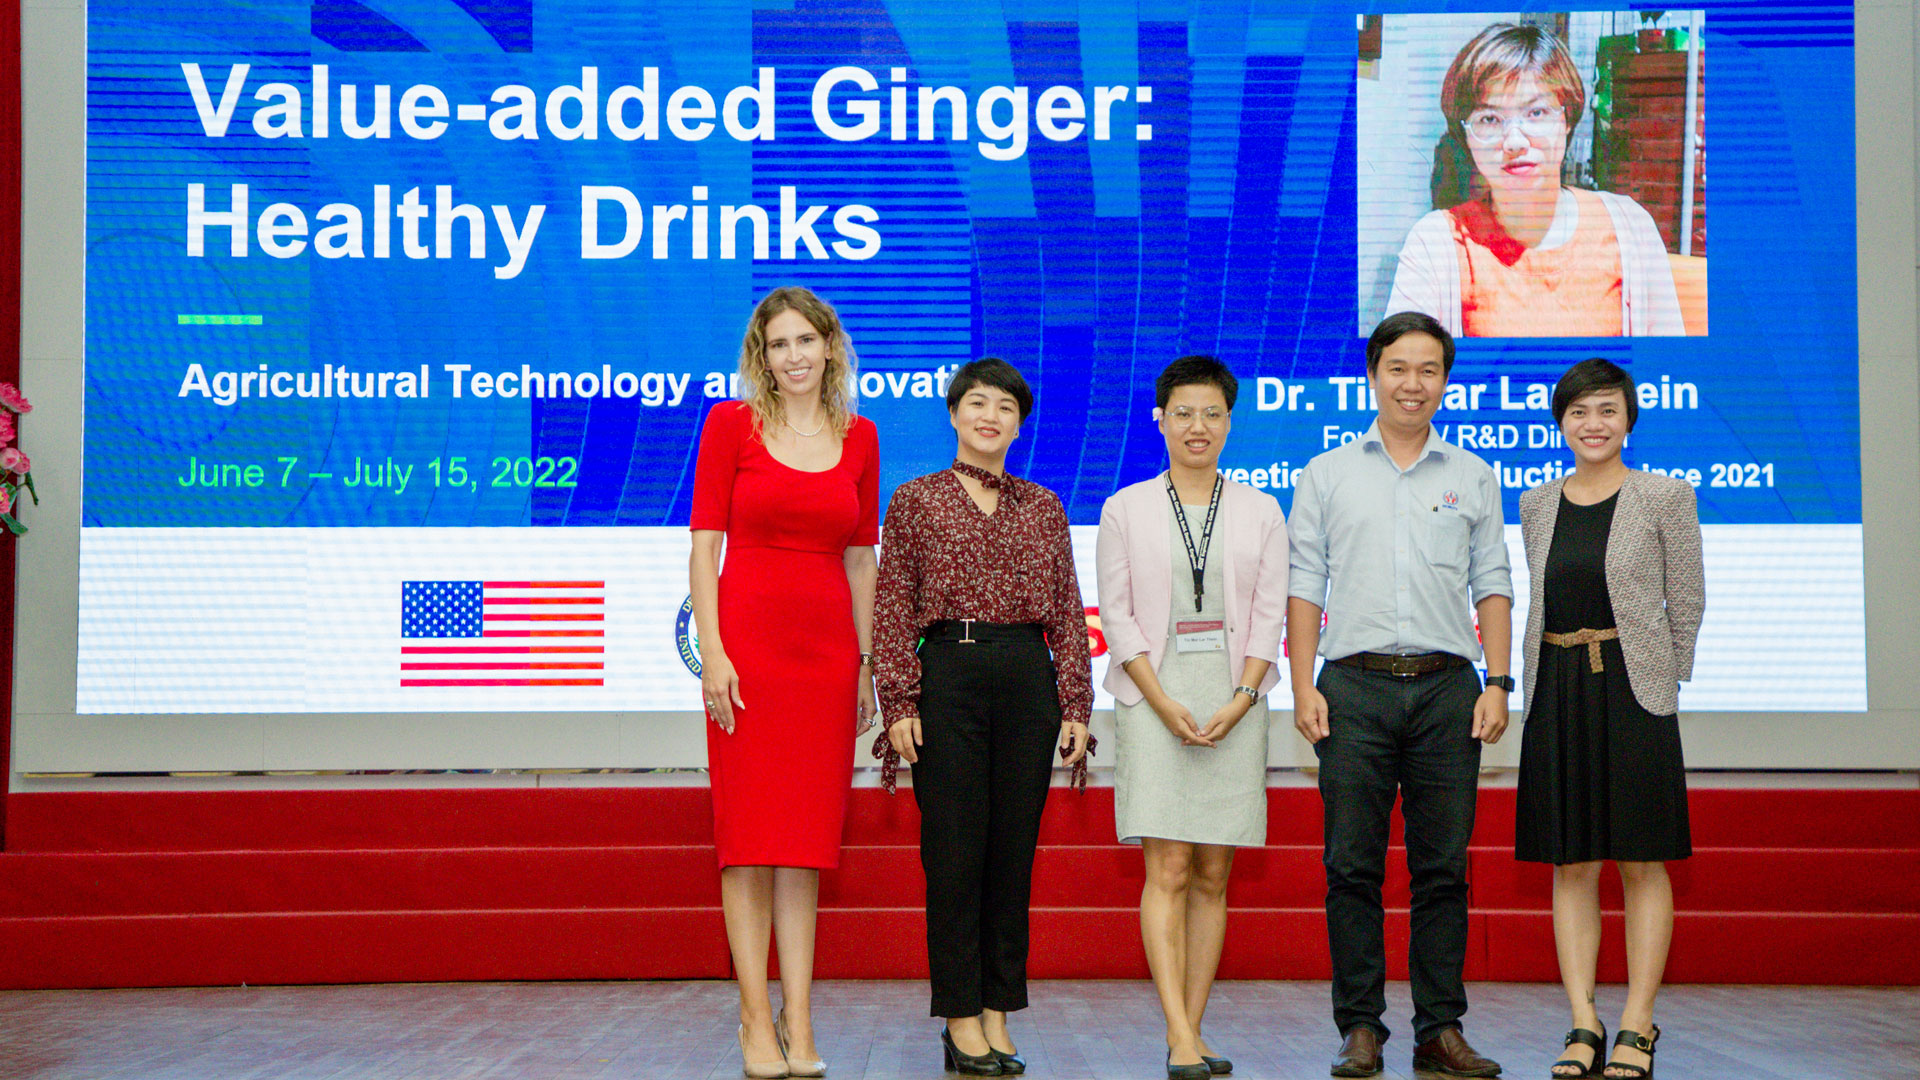 Tin Mar Lar Thien poses with Meghan Gibson and the MUSP Young Scientist Program pitch competition judges as the winner for her project for value-added, healthy ginger drinks.